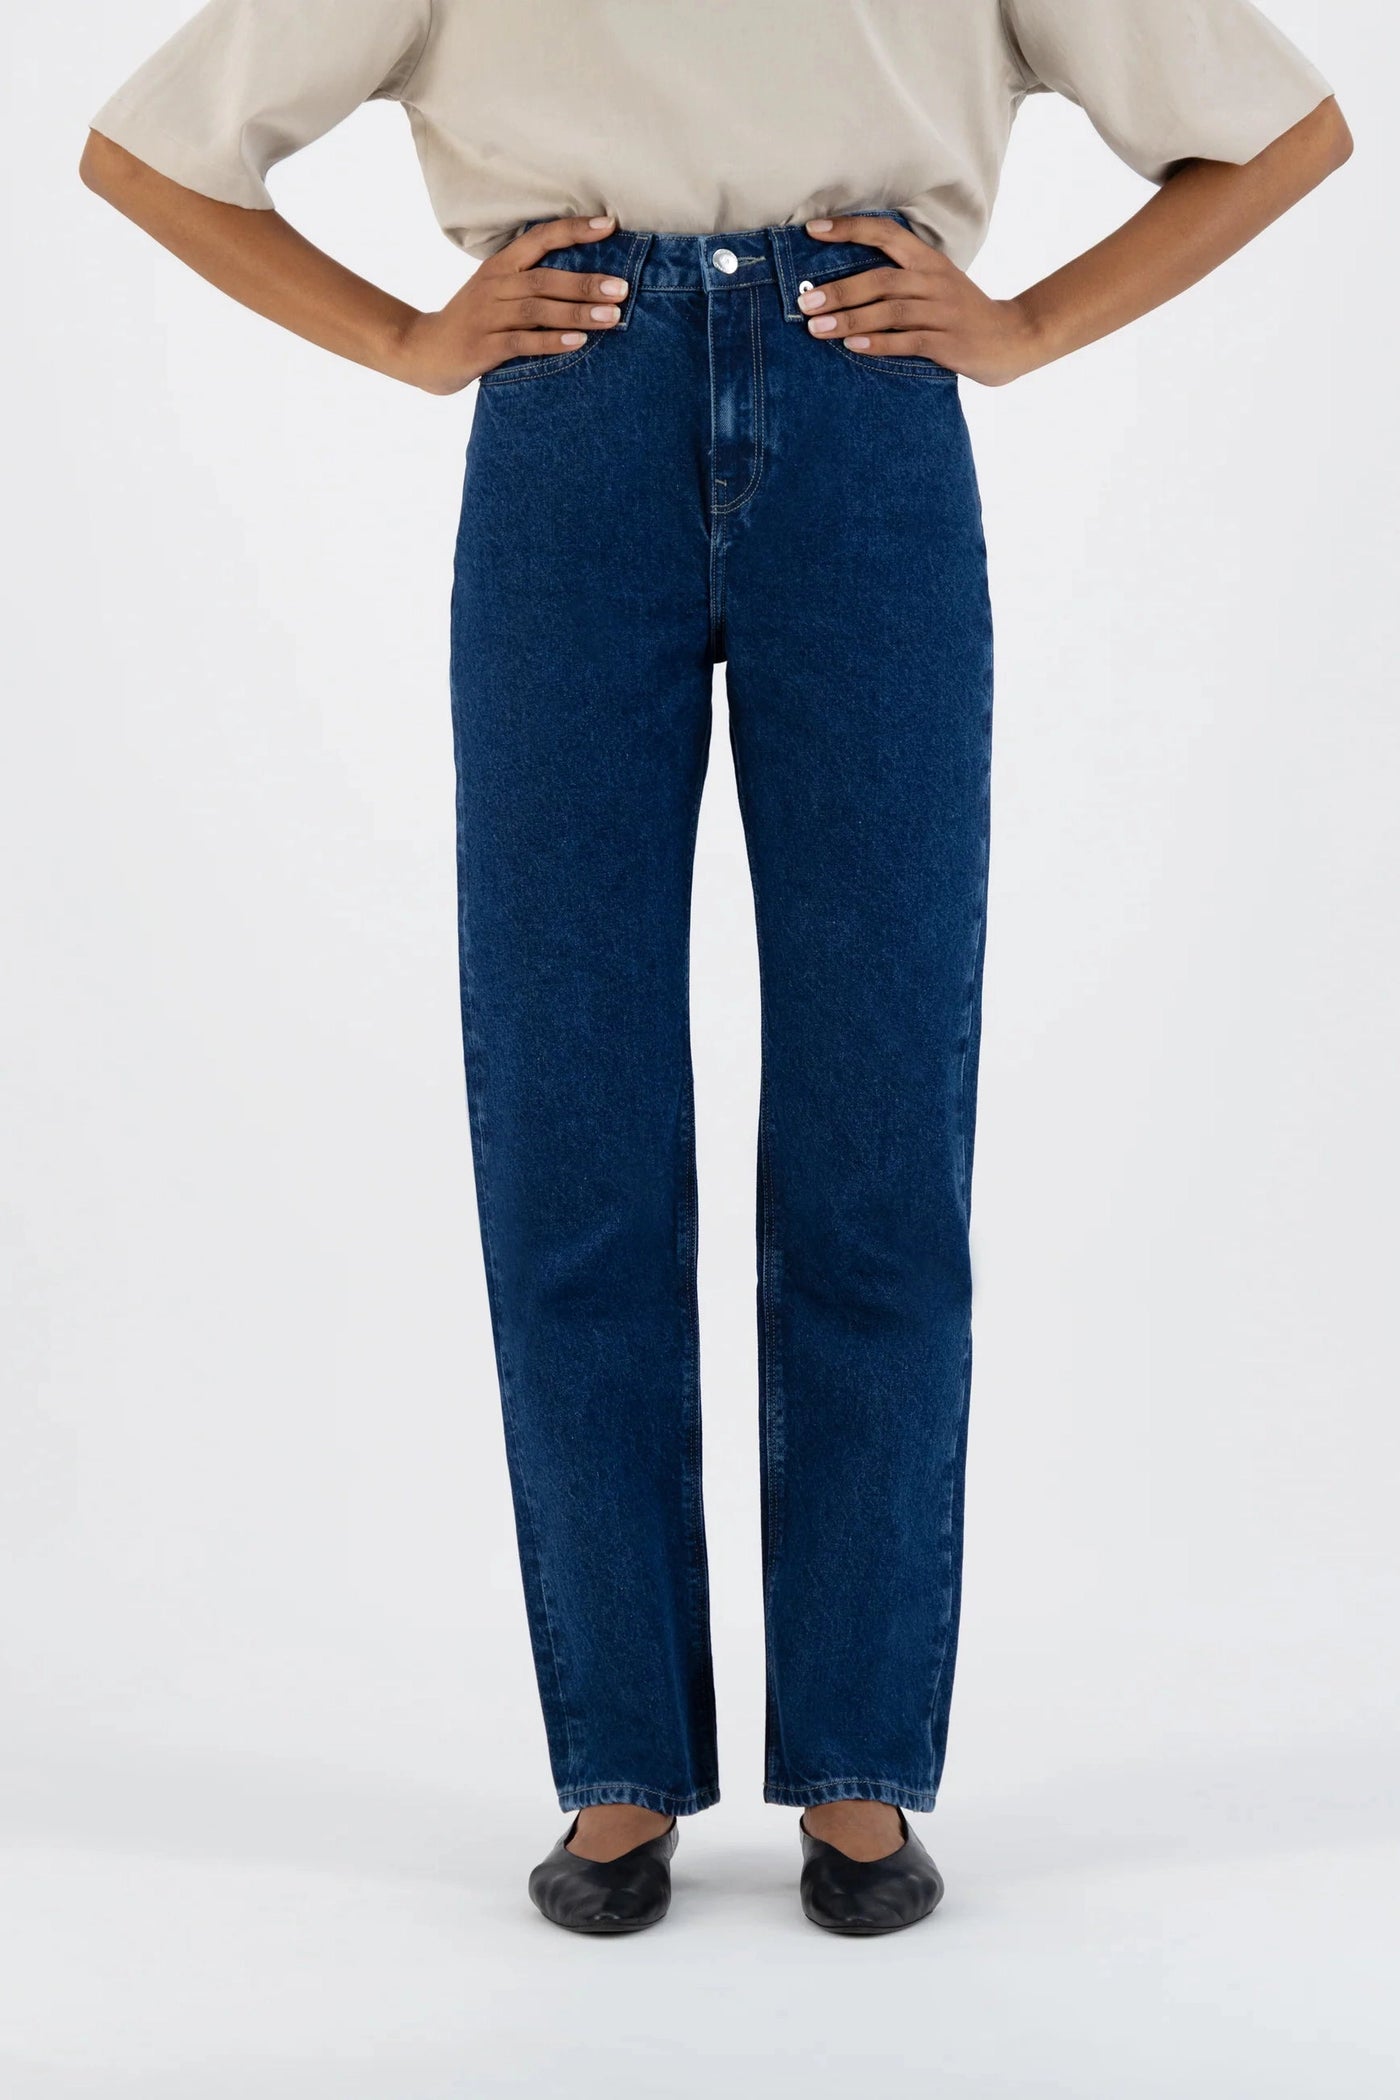 Mud Jeans Relax Rose in Stone Indigo-Womens-Ohh! By Gum - Shop Sustainable